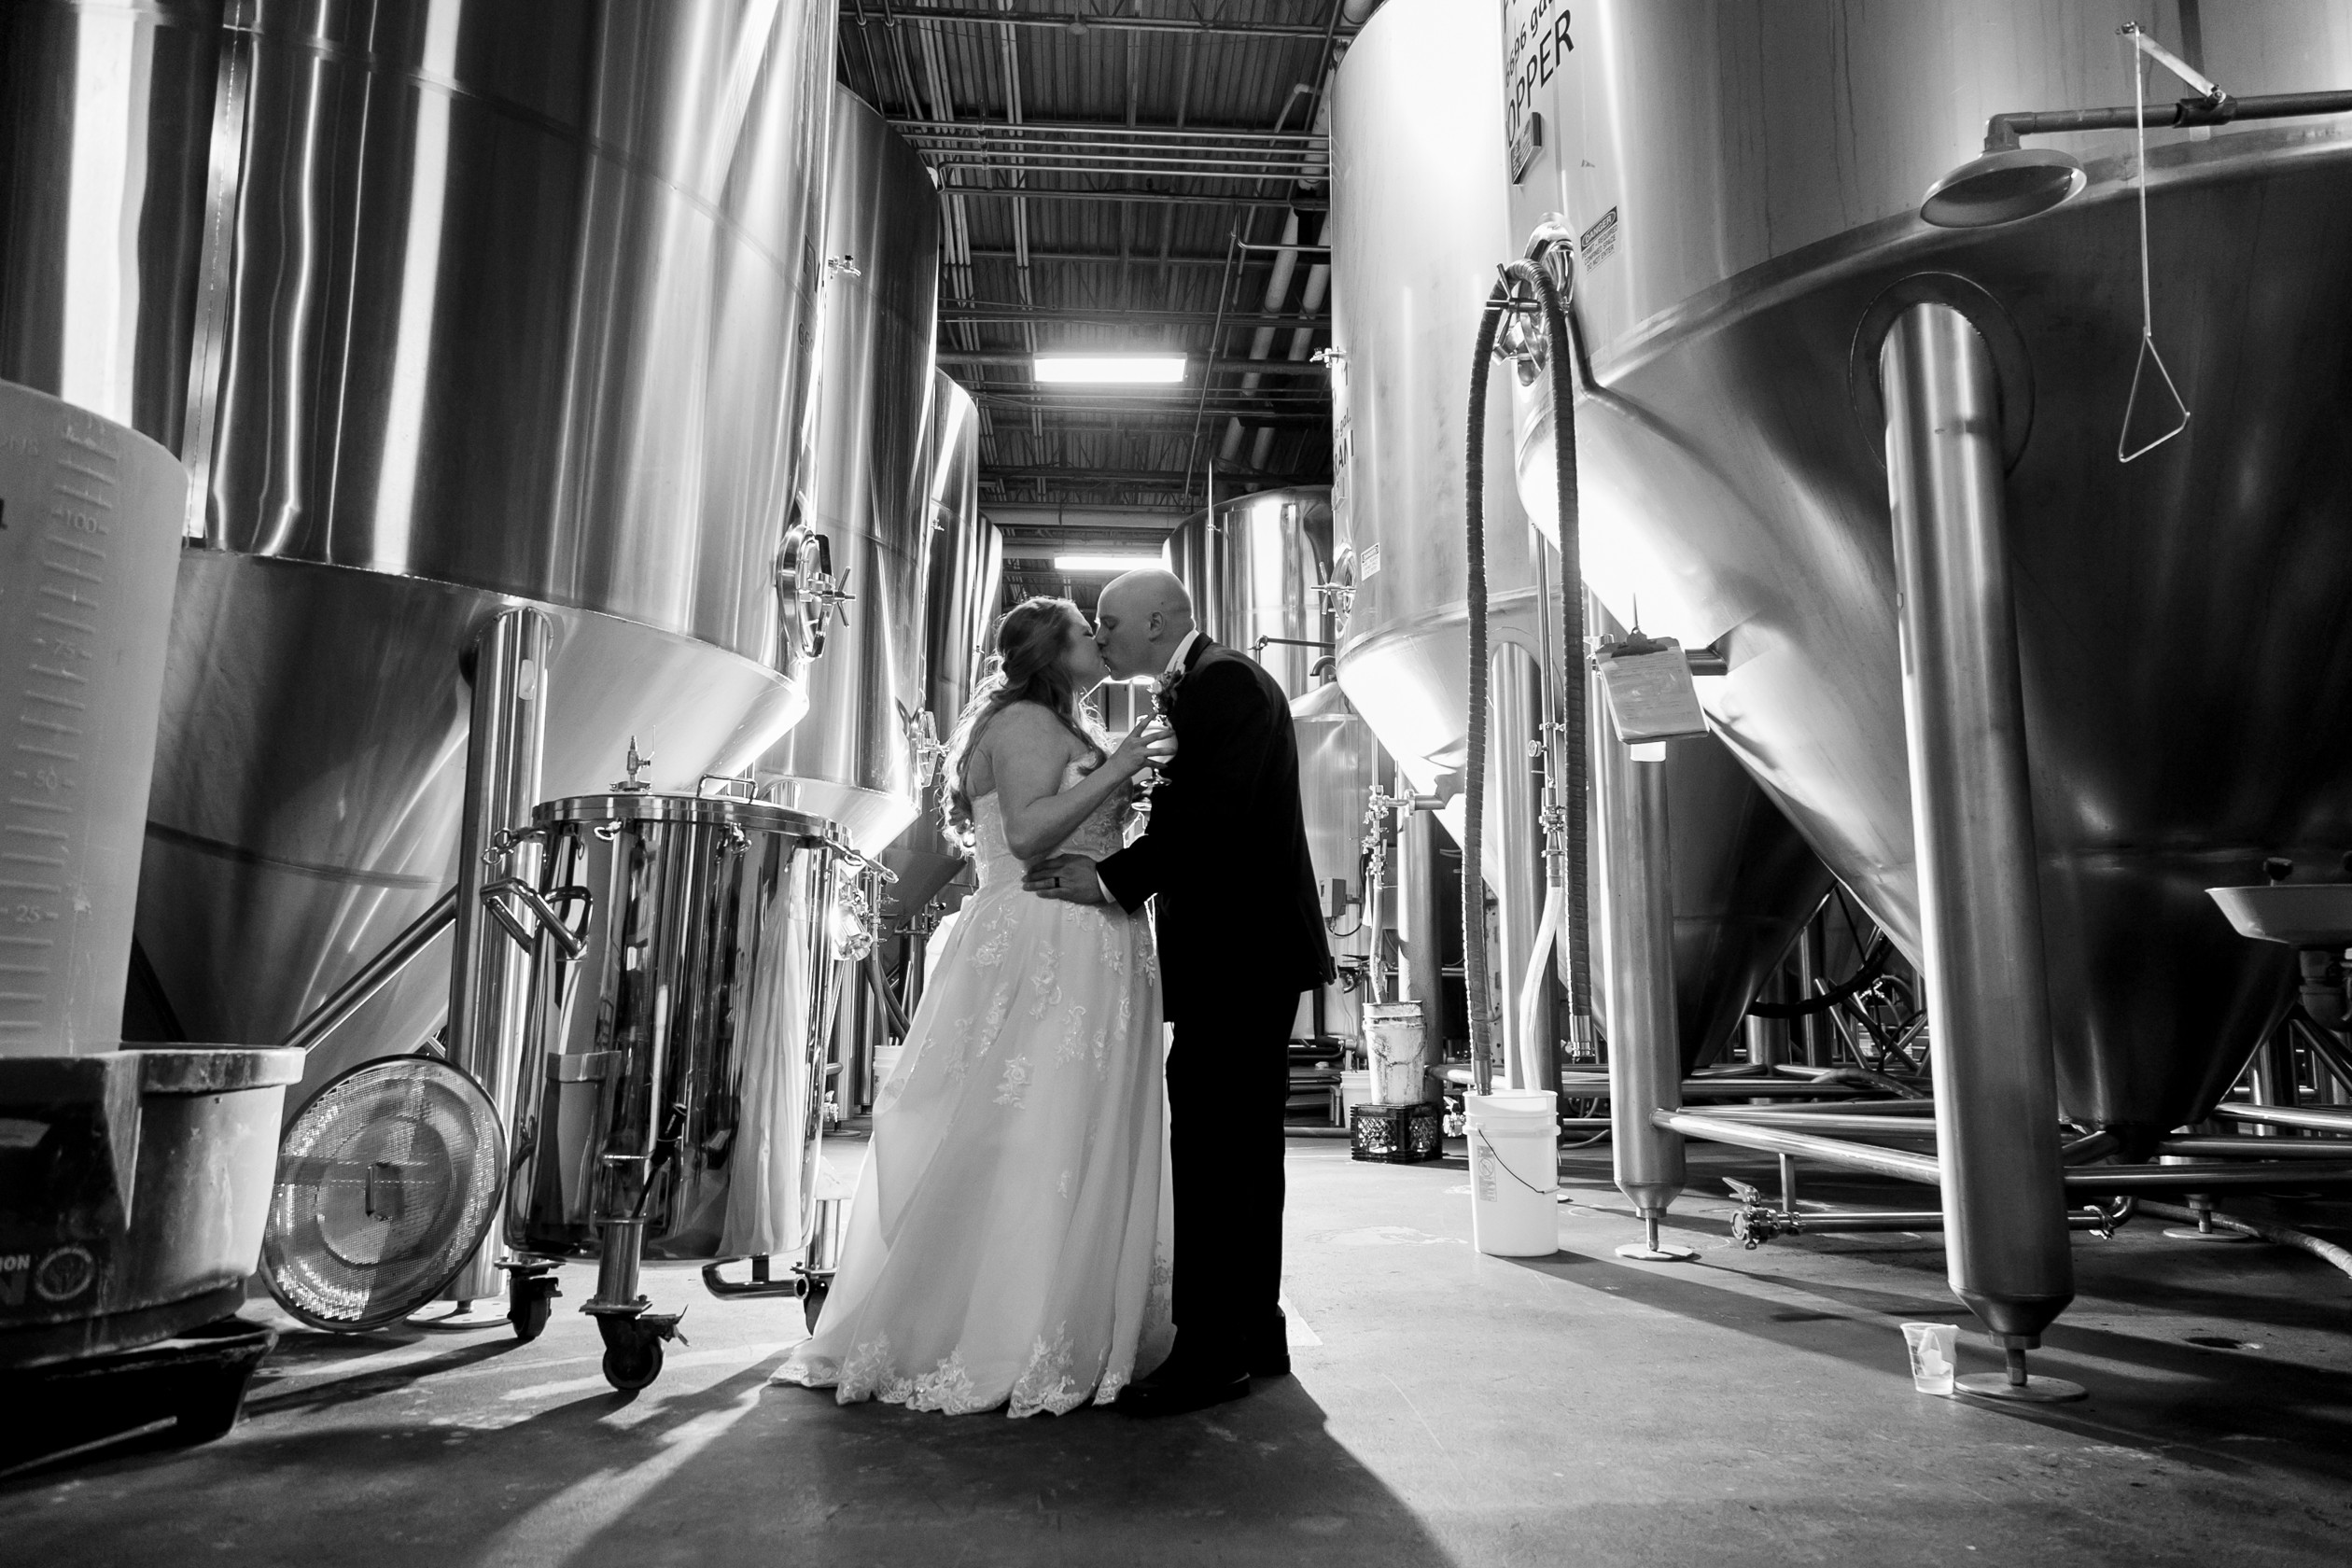 Bride and Groom kissing in front of distillery at Funky Buddha Brewery